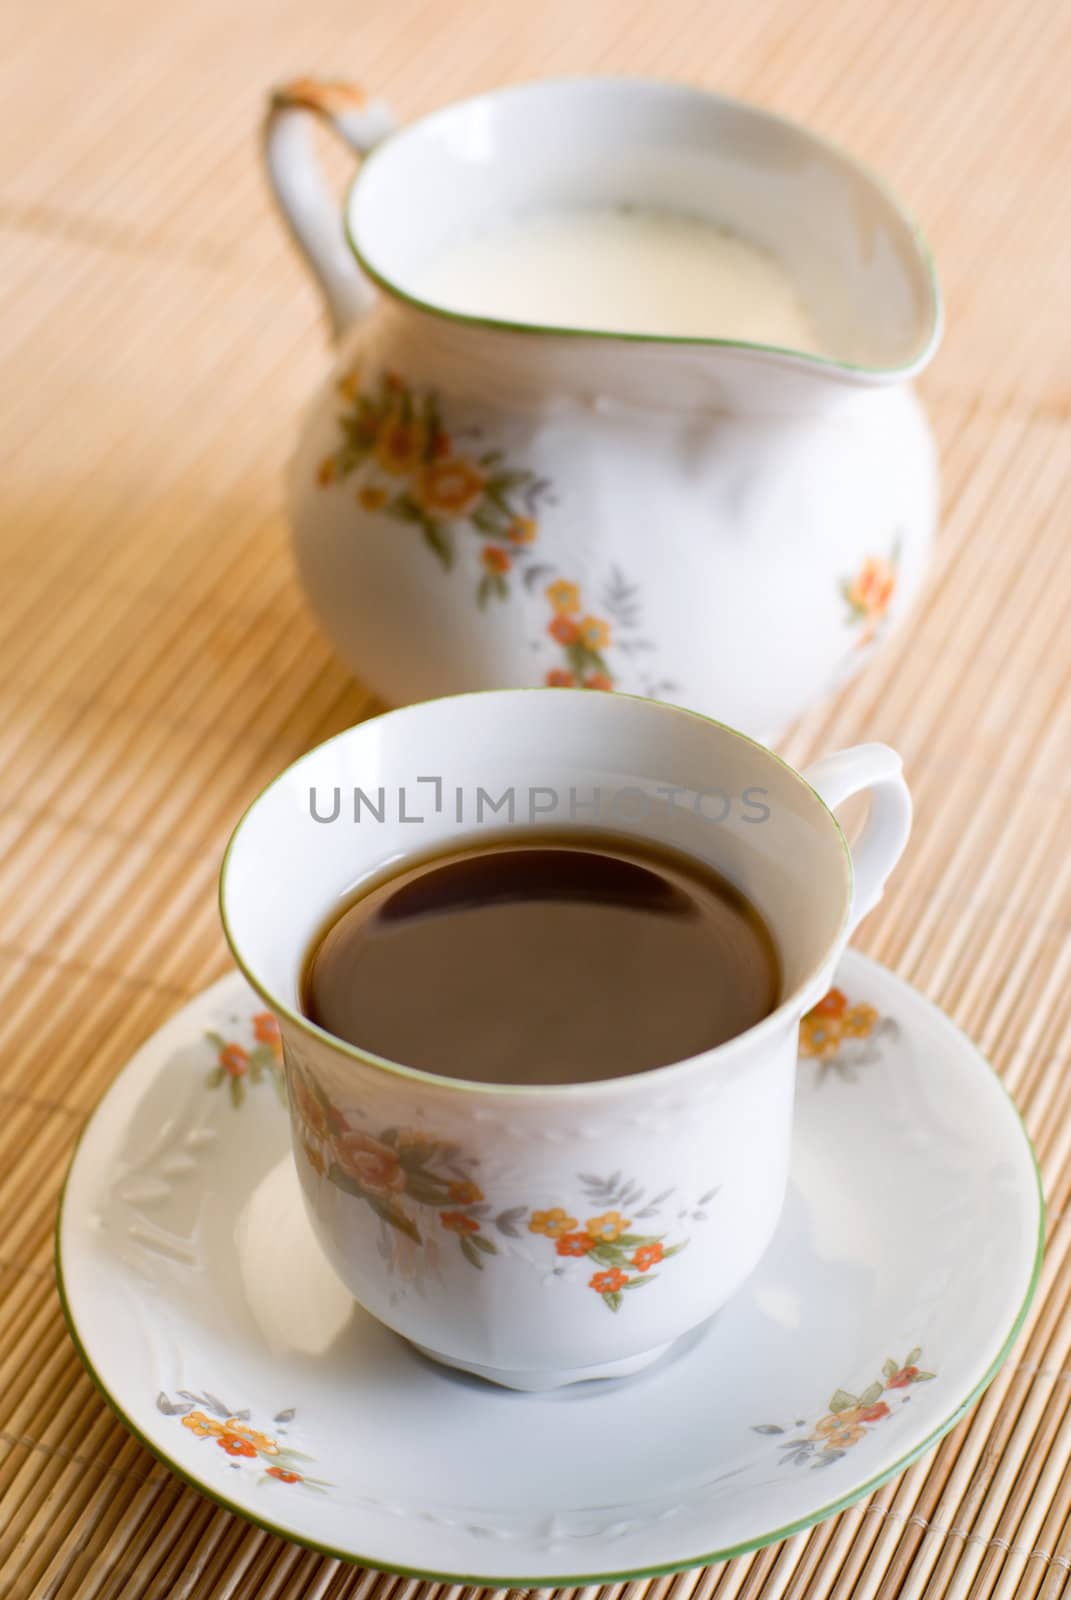 Cup of coffee or black tea (on the front, focus on the liquid surface) and a floral pattern porcelain milk jug on the wooden mat behind. Shallow DOF.